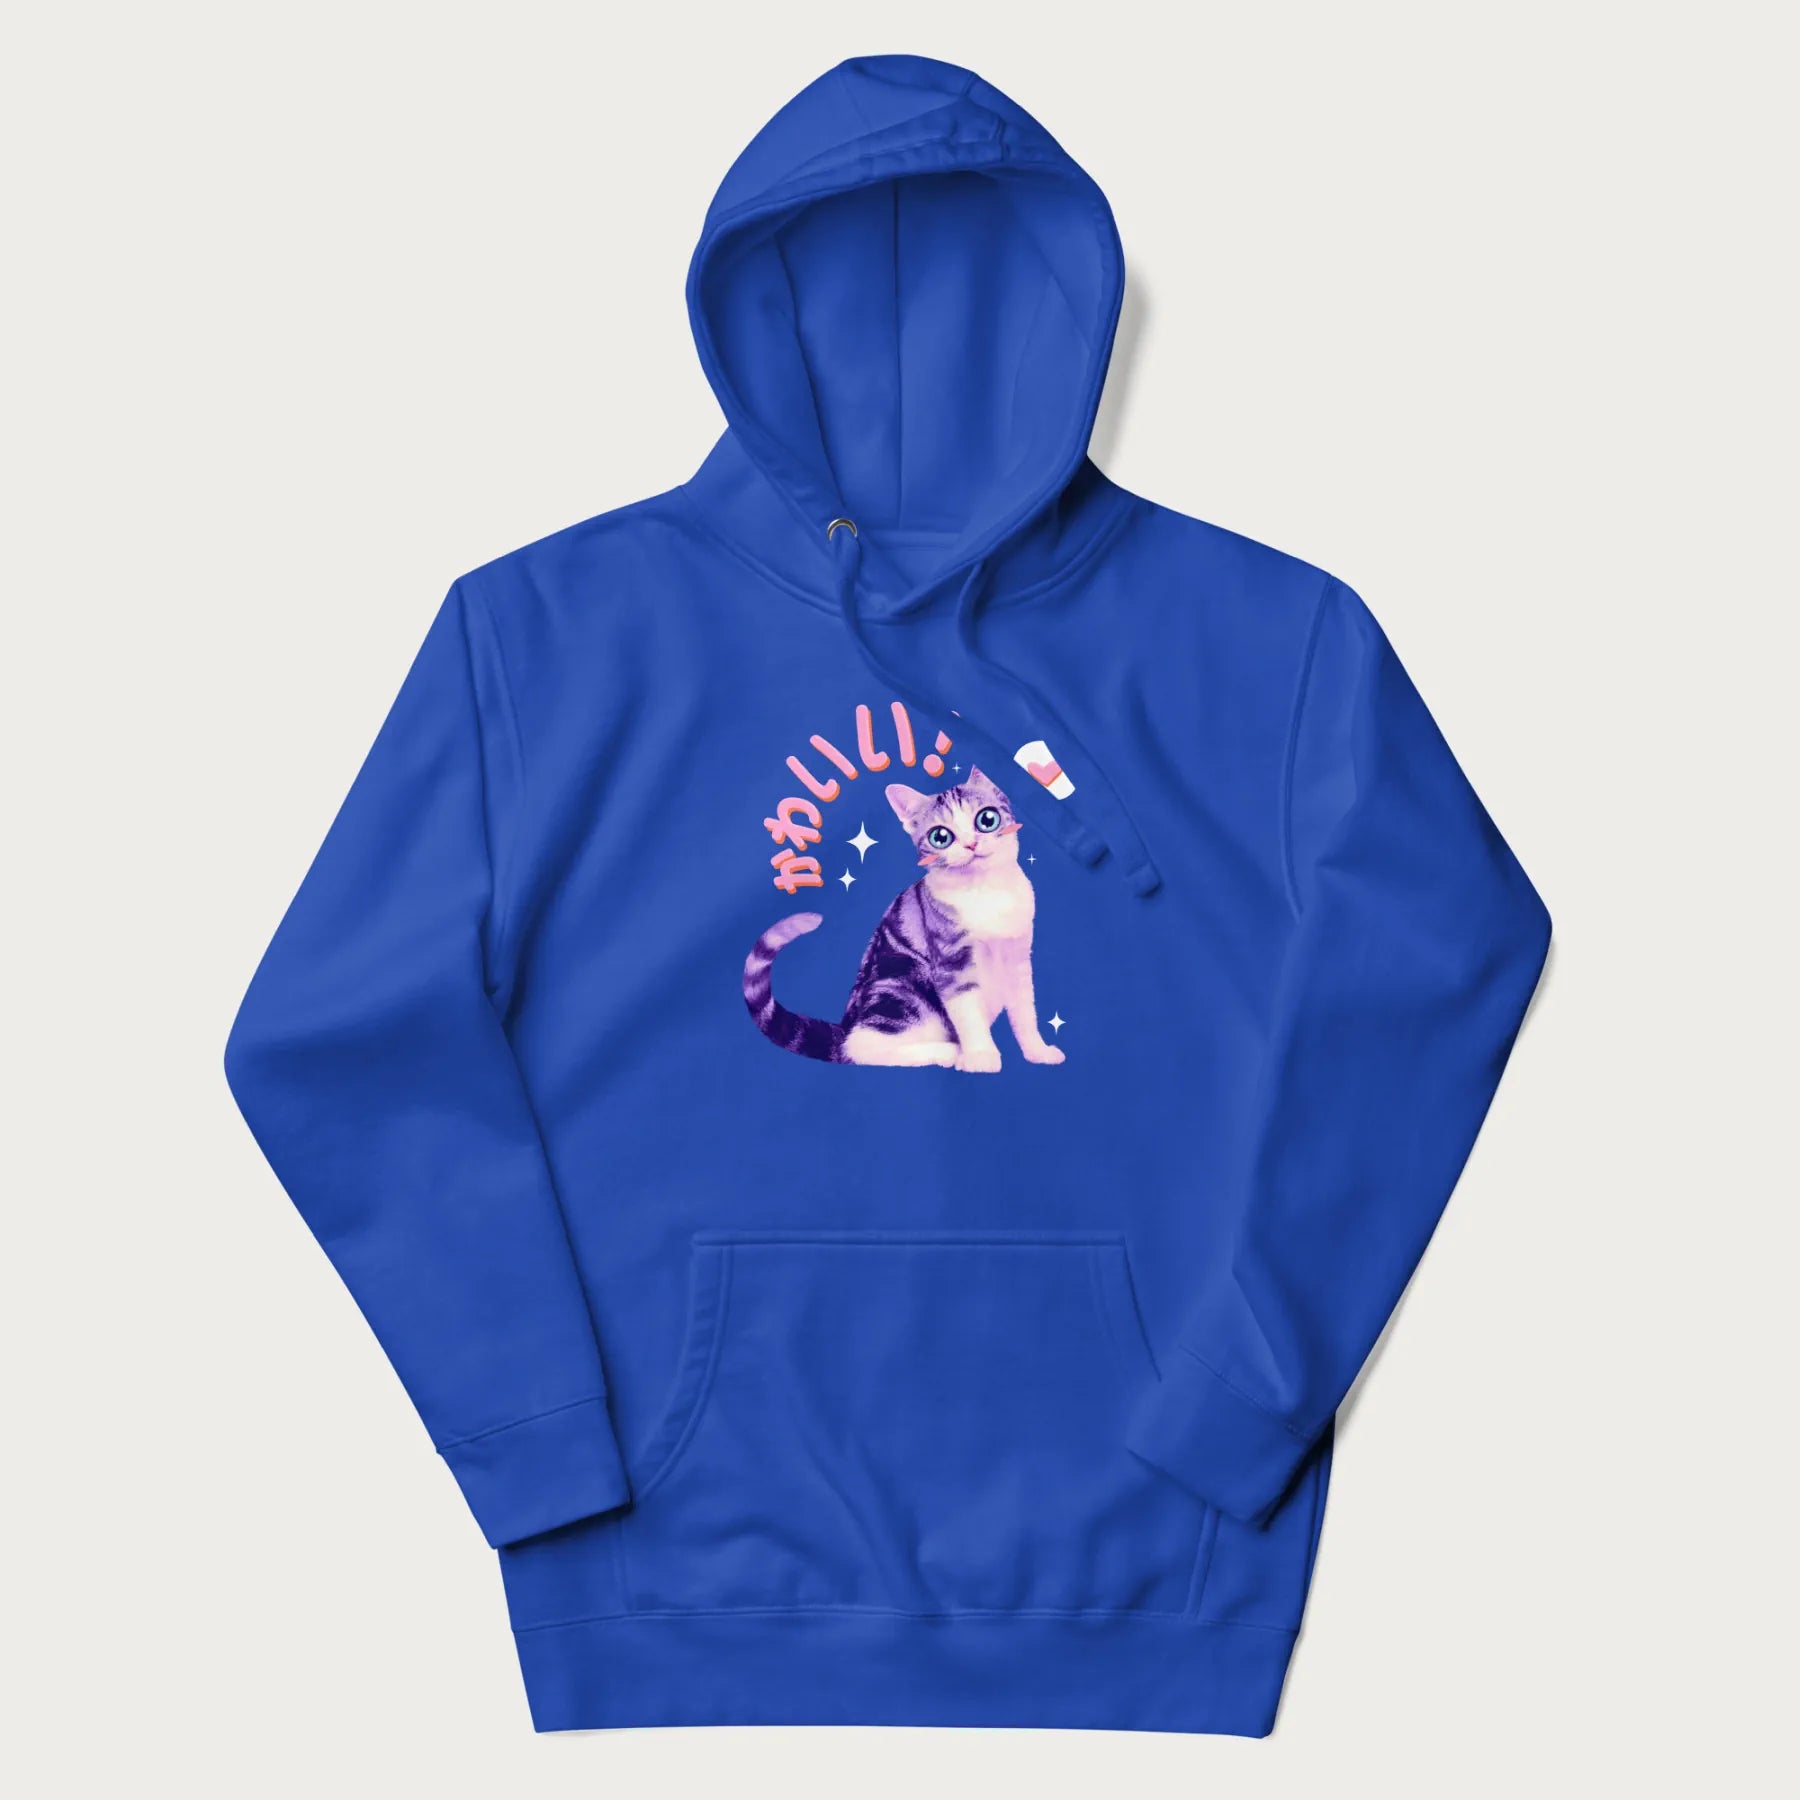 Royal blue hoodie with a graphic of a blue-eyed kitten and Japanese kawaii-style lettering, stars, and a heart.